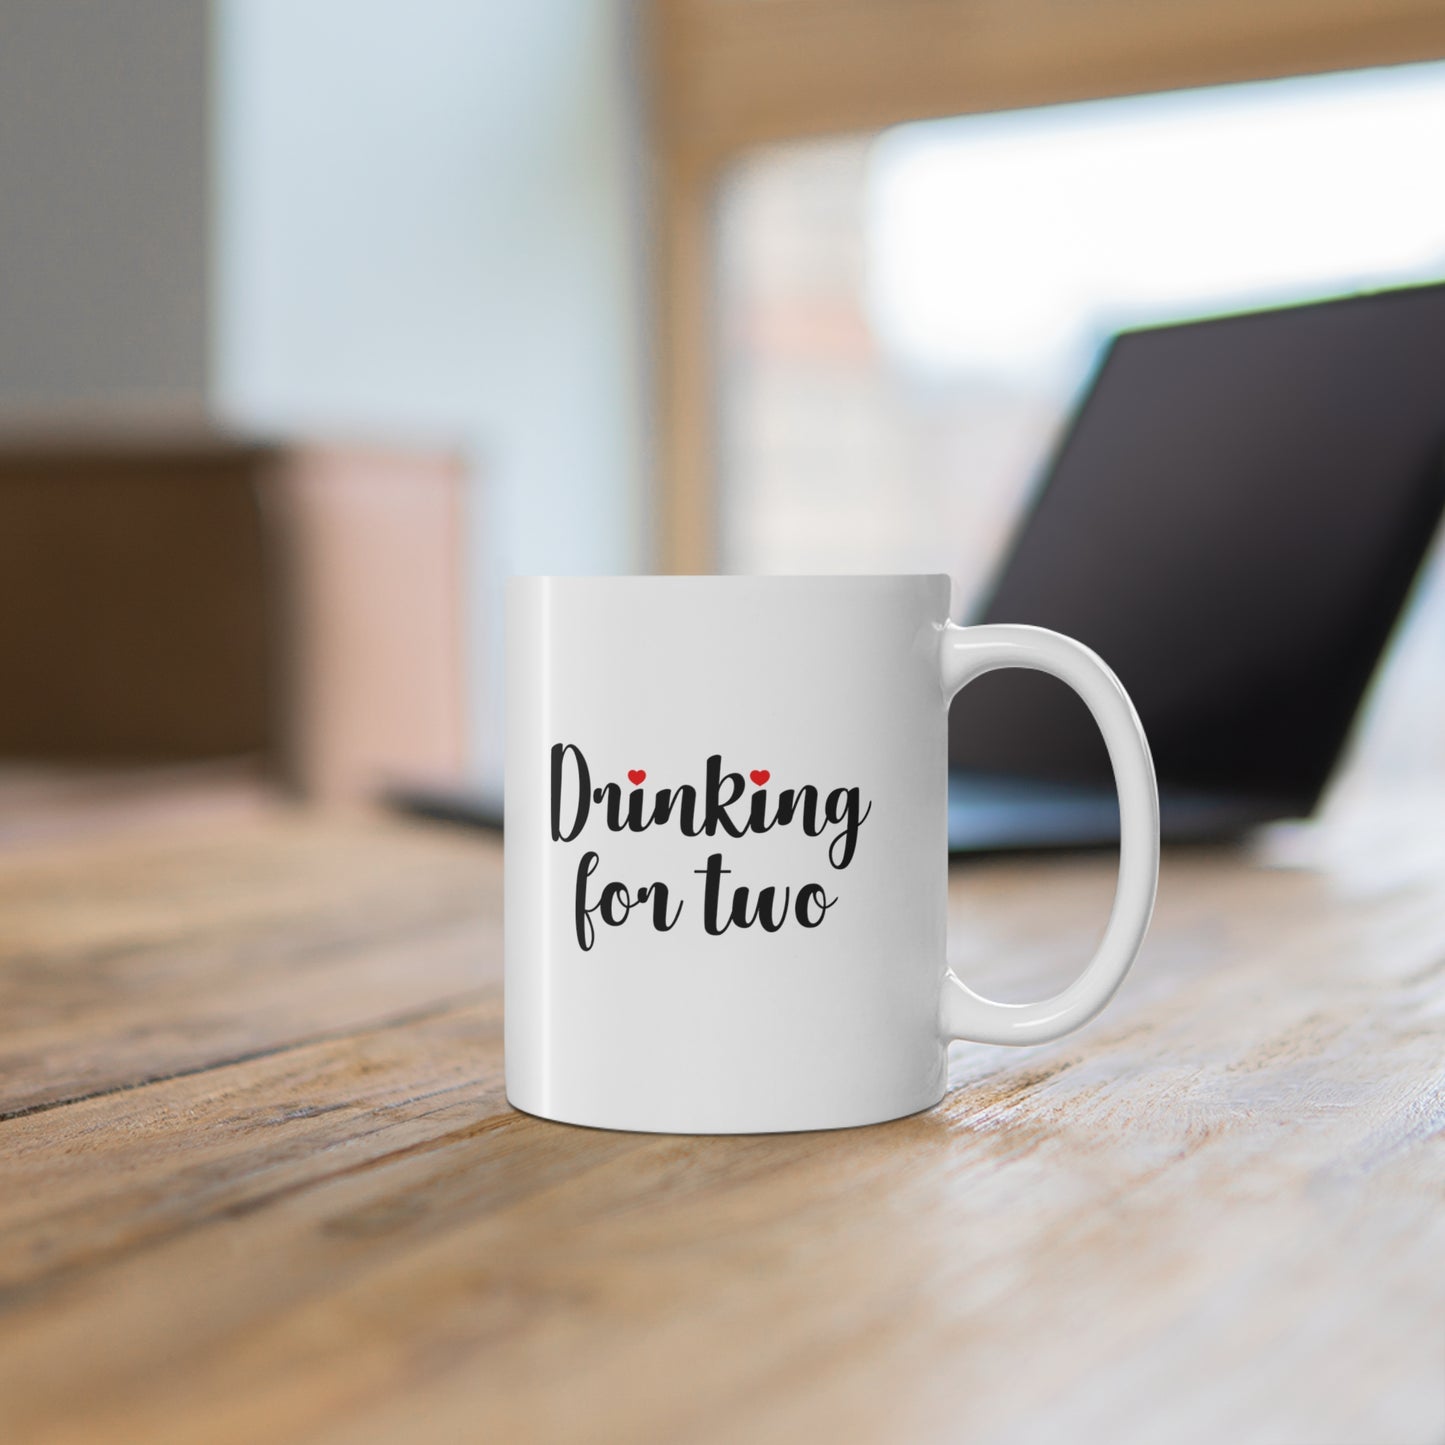 11oz ceramic mug with quote Drinking For Two